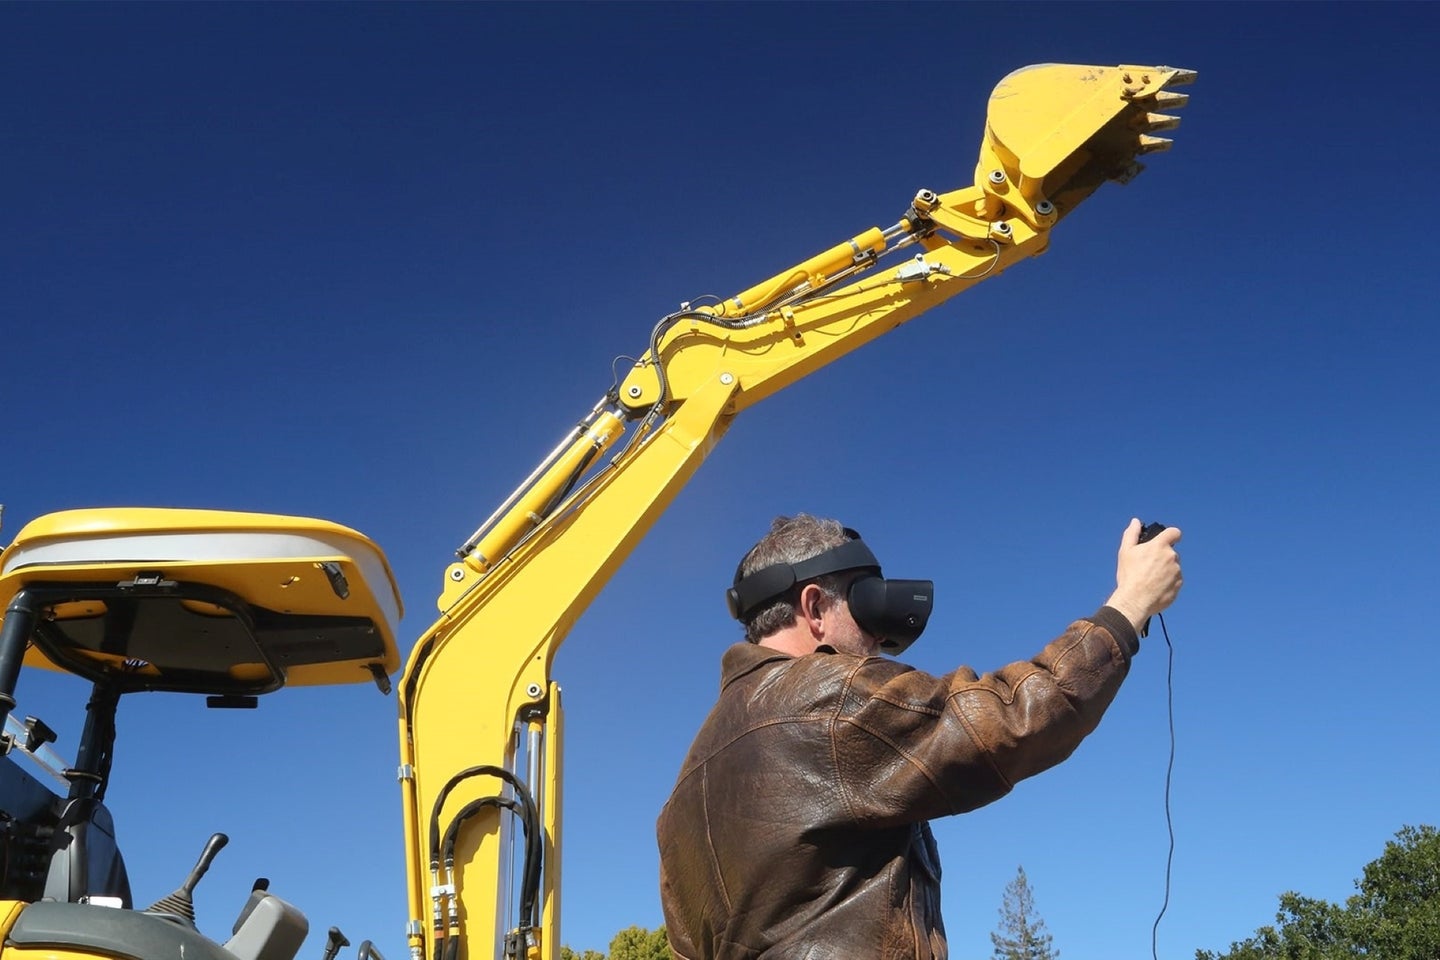 A robotic excavator lifts its scooper as commanded by a user wearing an Oculus headset.